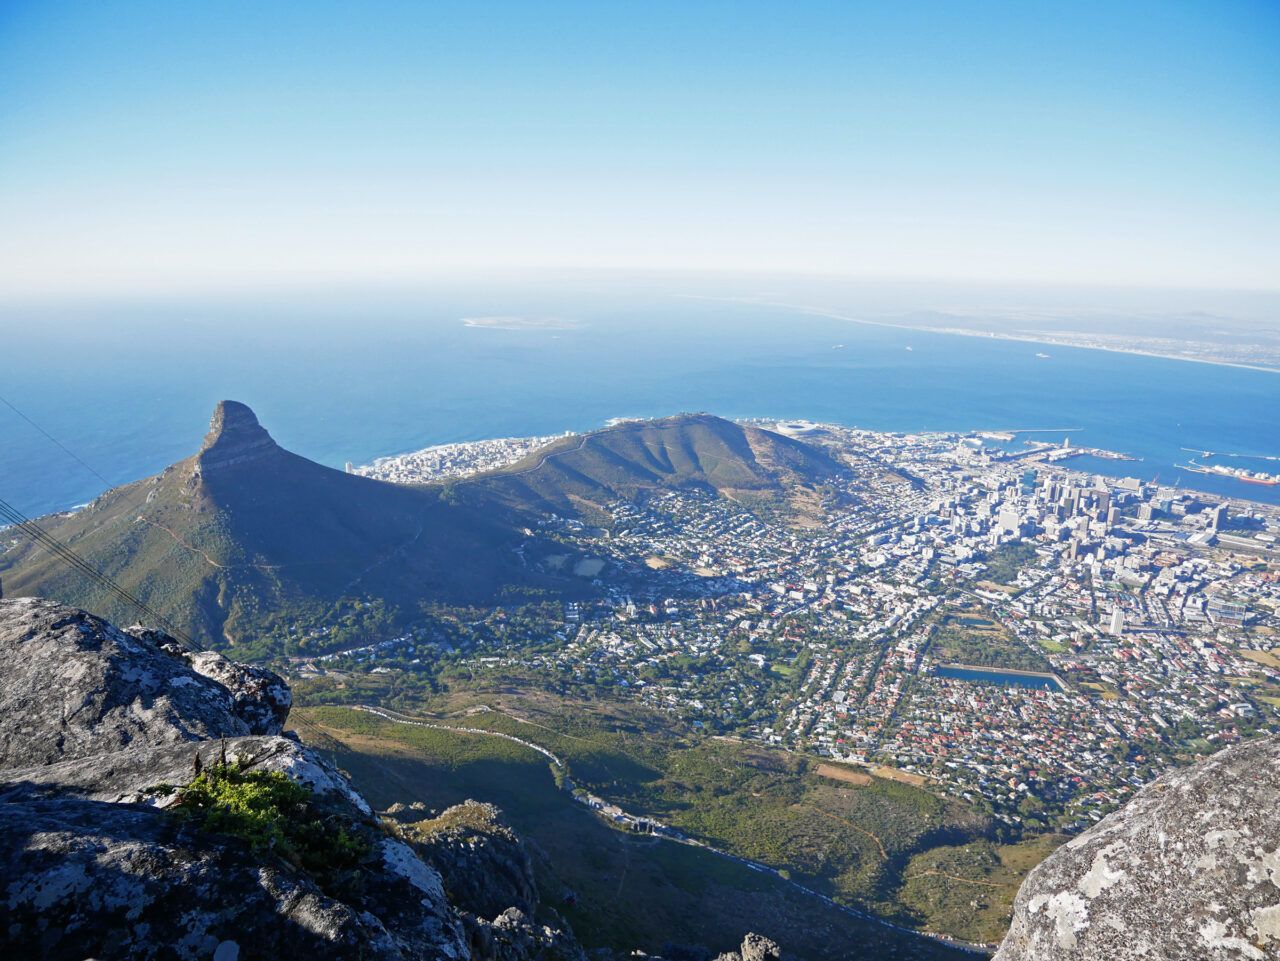 View from the top of Table Mountain, Cape Town